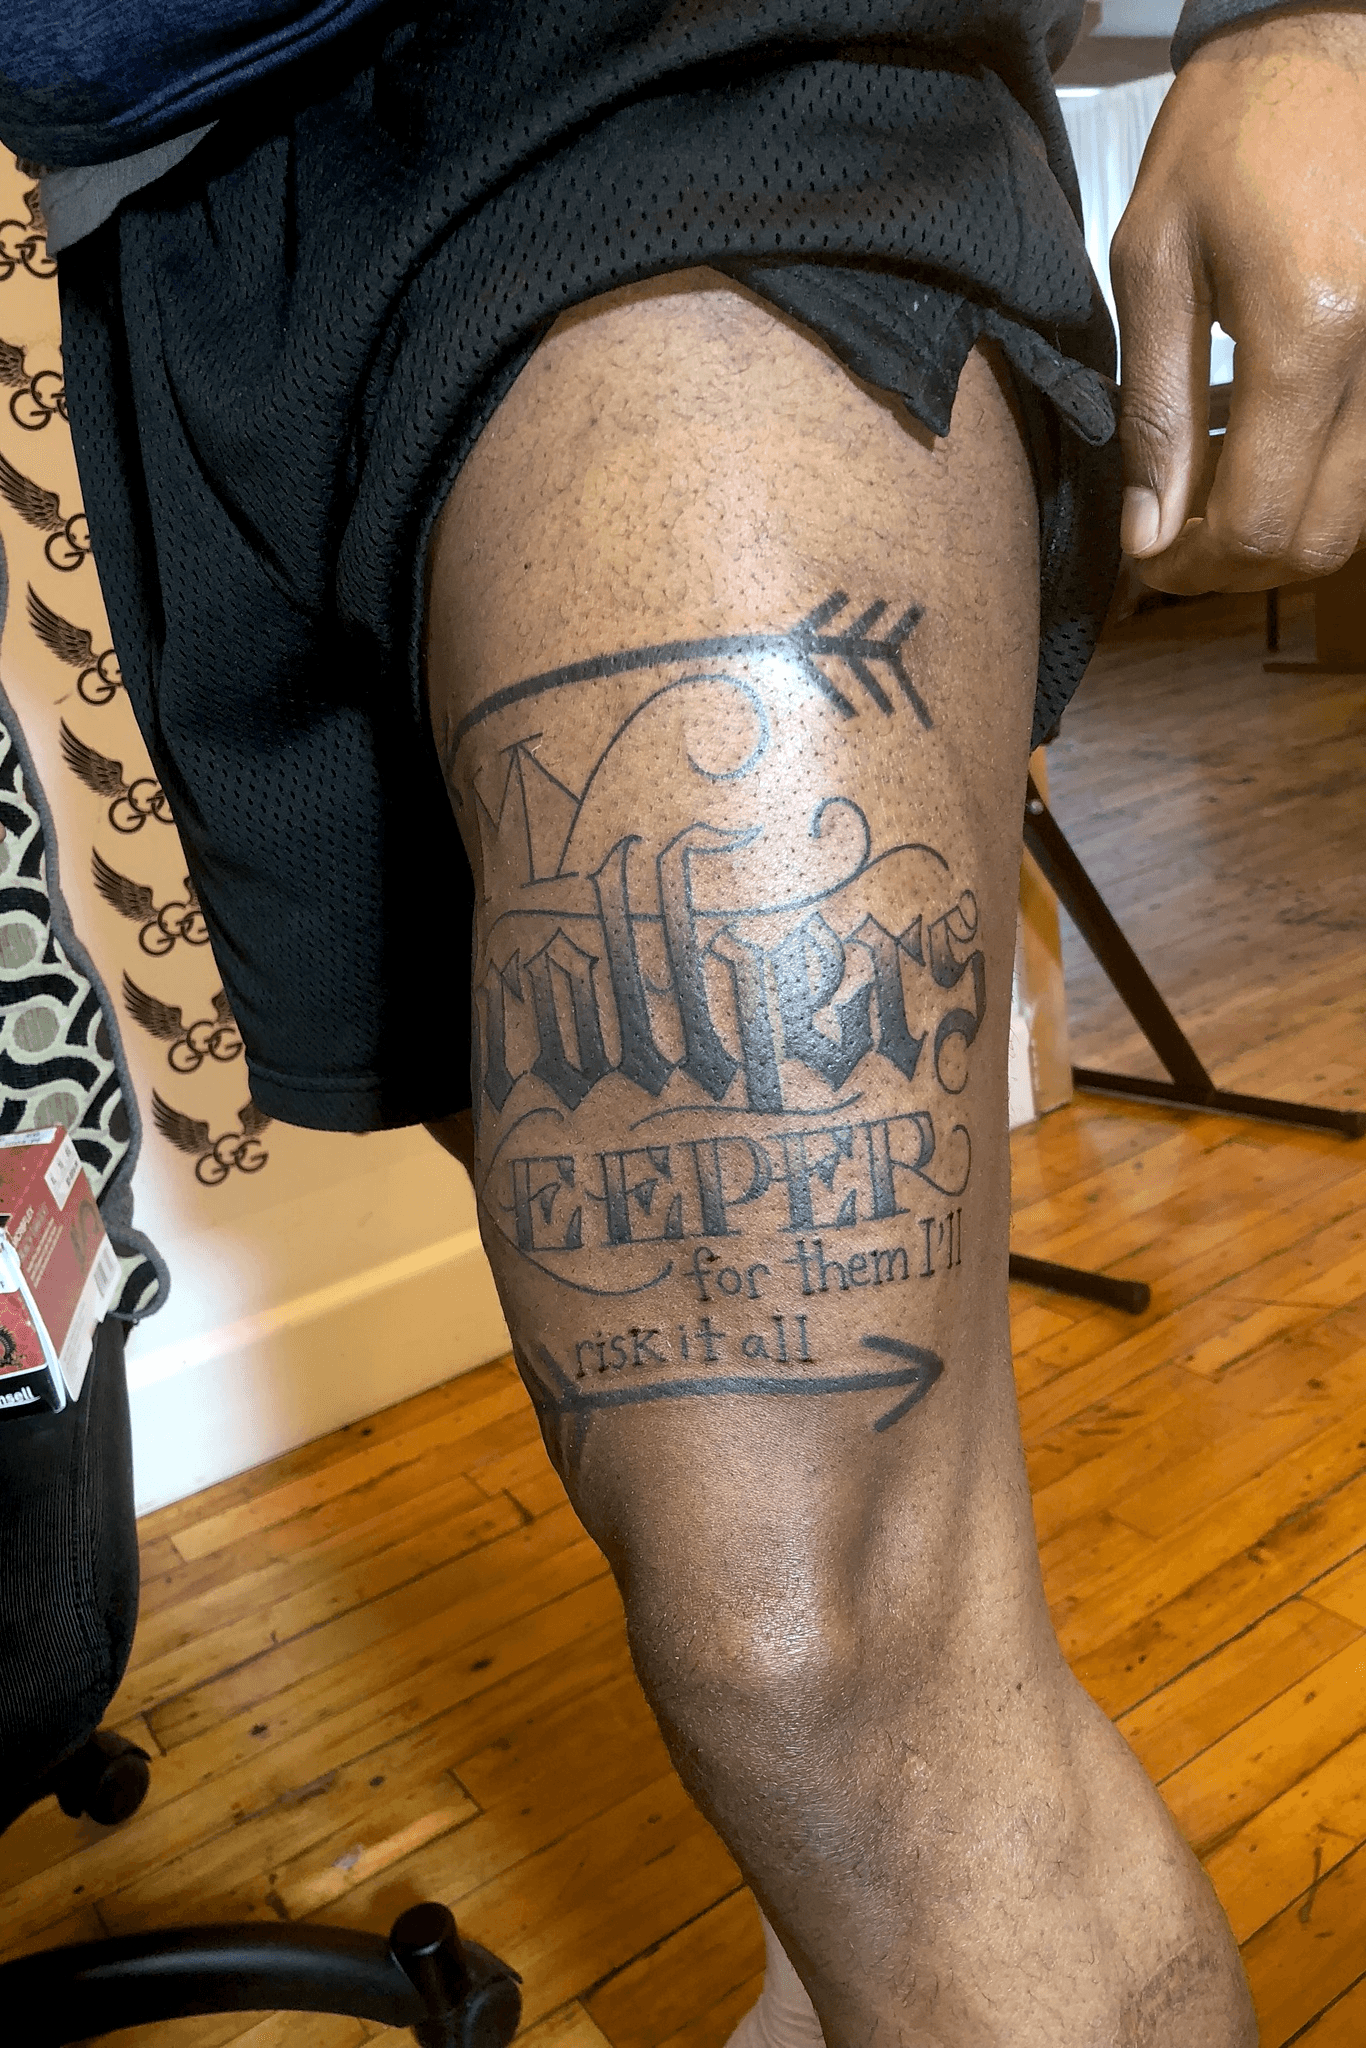 50 Best My Brothers Keeper Tattoos Ideas  Meanings  Tattoo Me Now  Brother  tattoos Tattoos with meaning Tattoo designs men